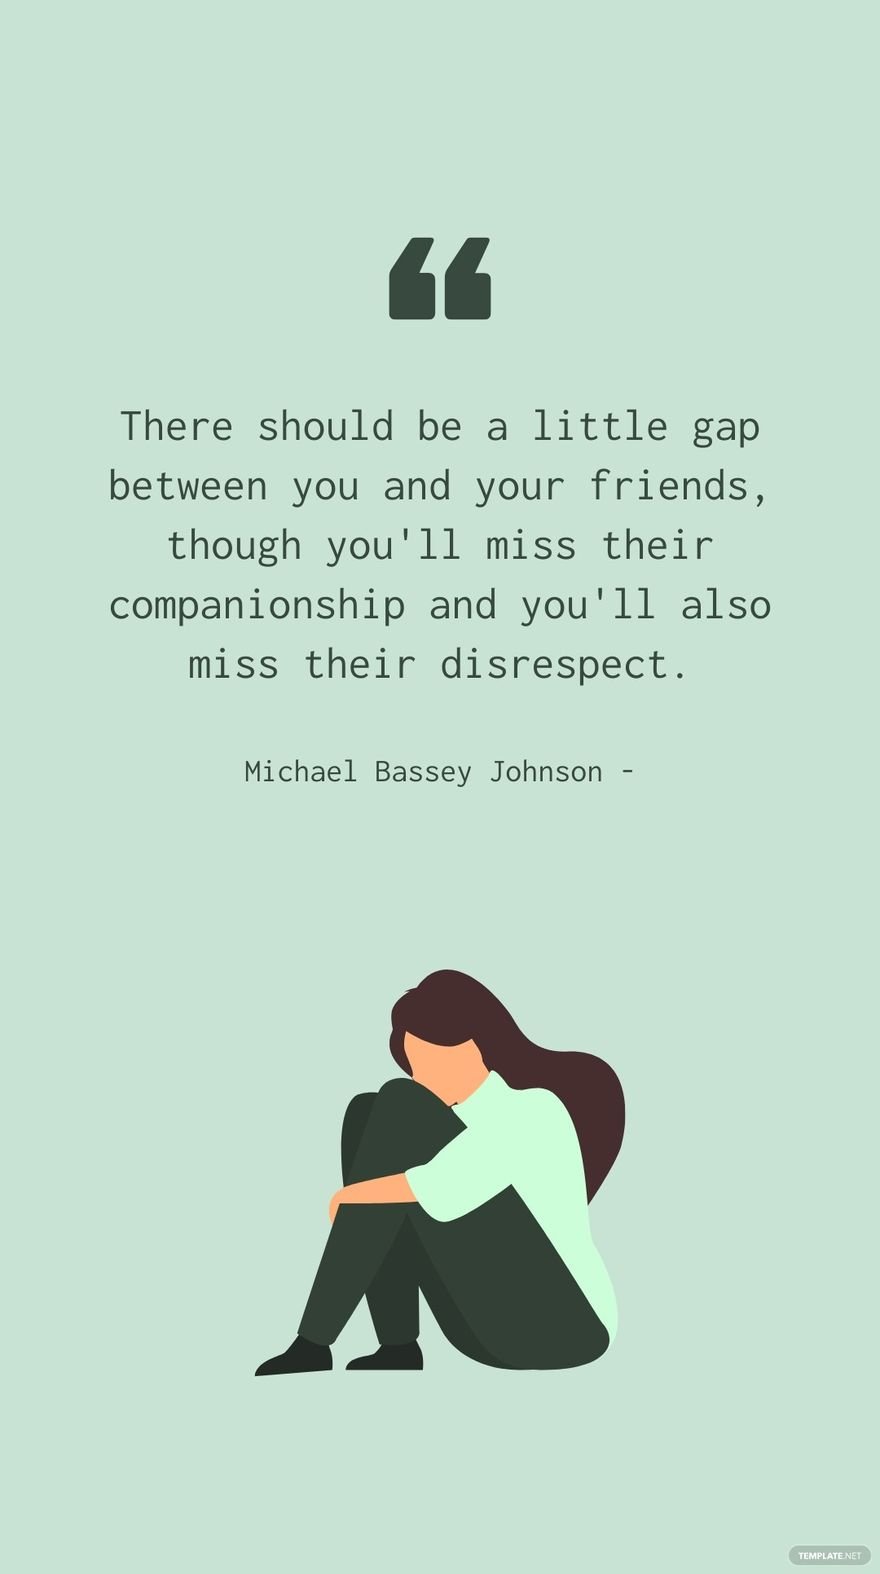 Michael Bassey Johnson - There should be a little gap between you and your friends, though you'll miss their companionship and you'll also miss their disrespect.